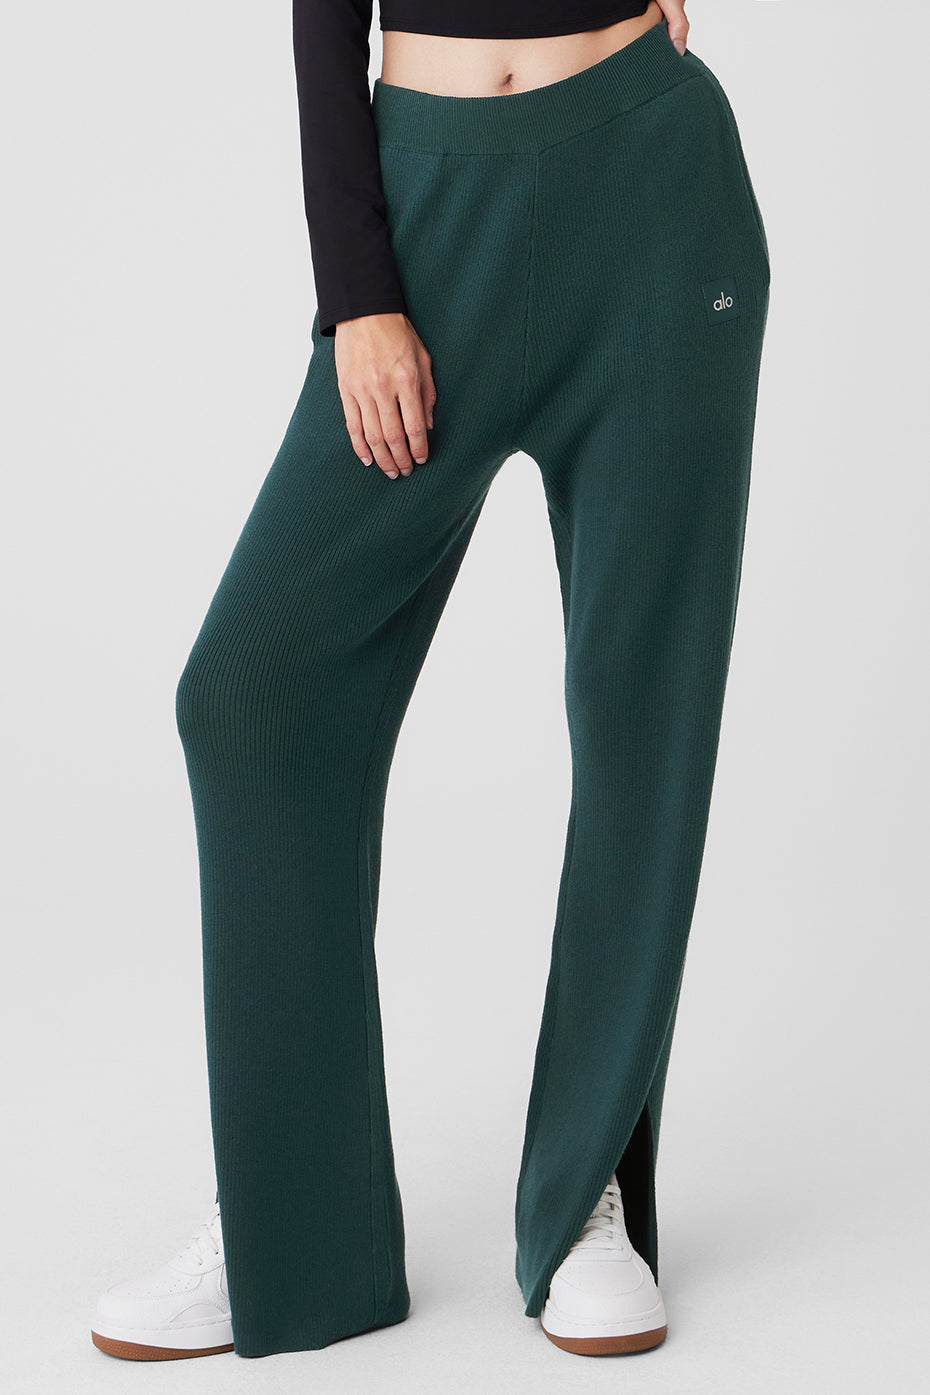 Alo Yoga®  Road Trip Trouser in Midnight Green, Size: Small